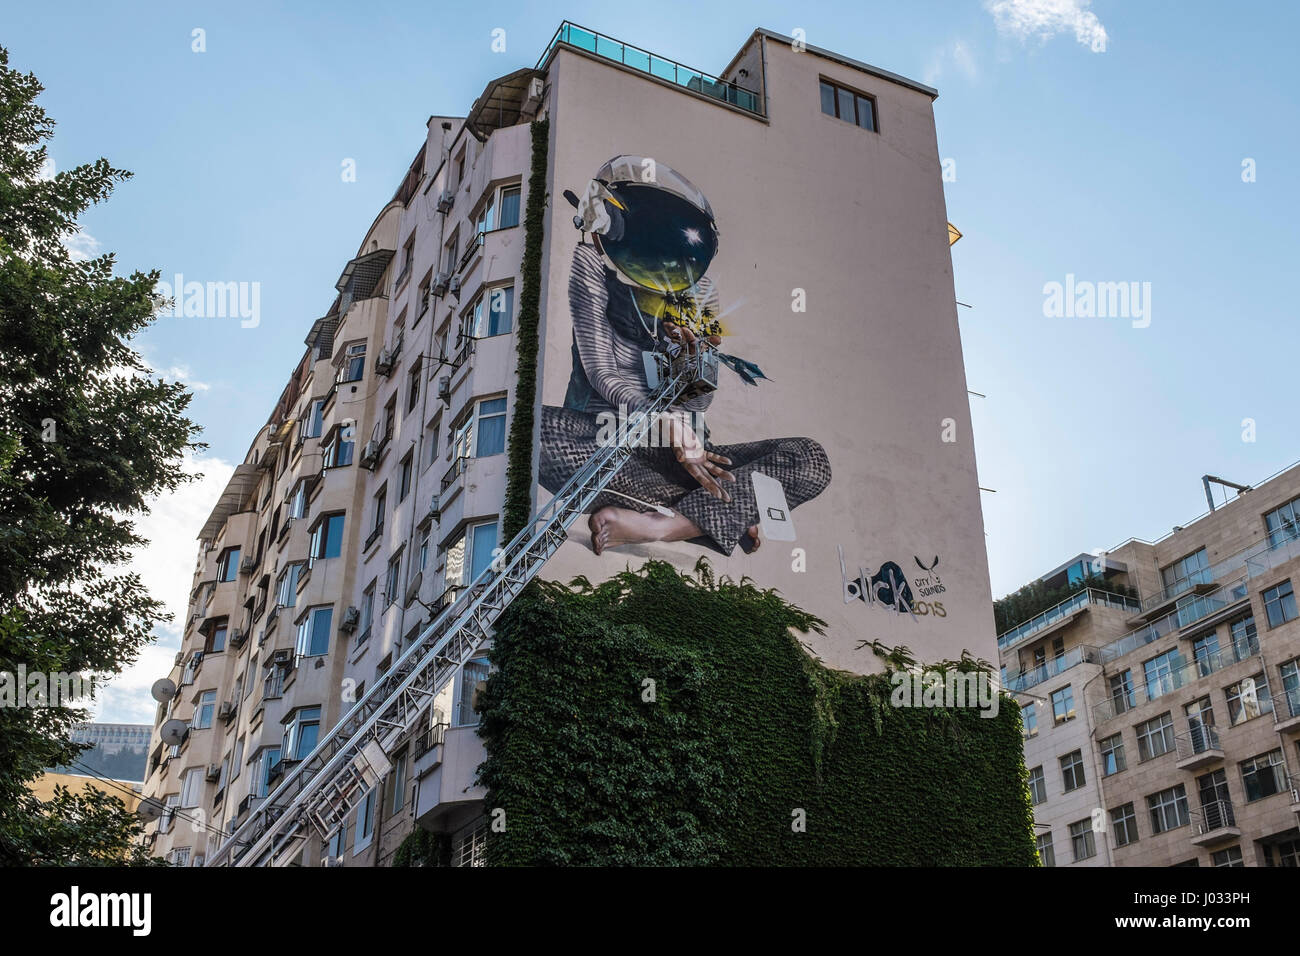 Street art graffiti being painted on apartment building in Tbilisi, Georgia, Eastern Europe Stock Photo